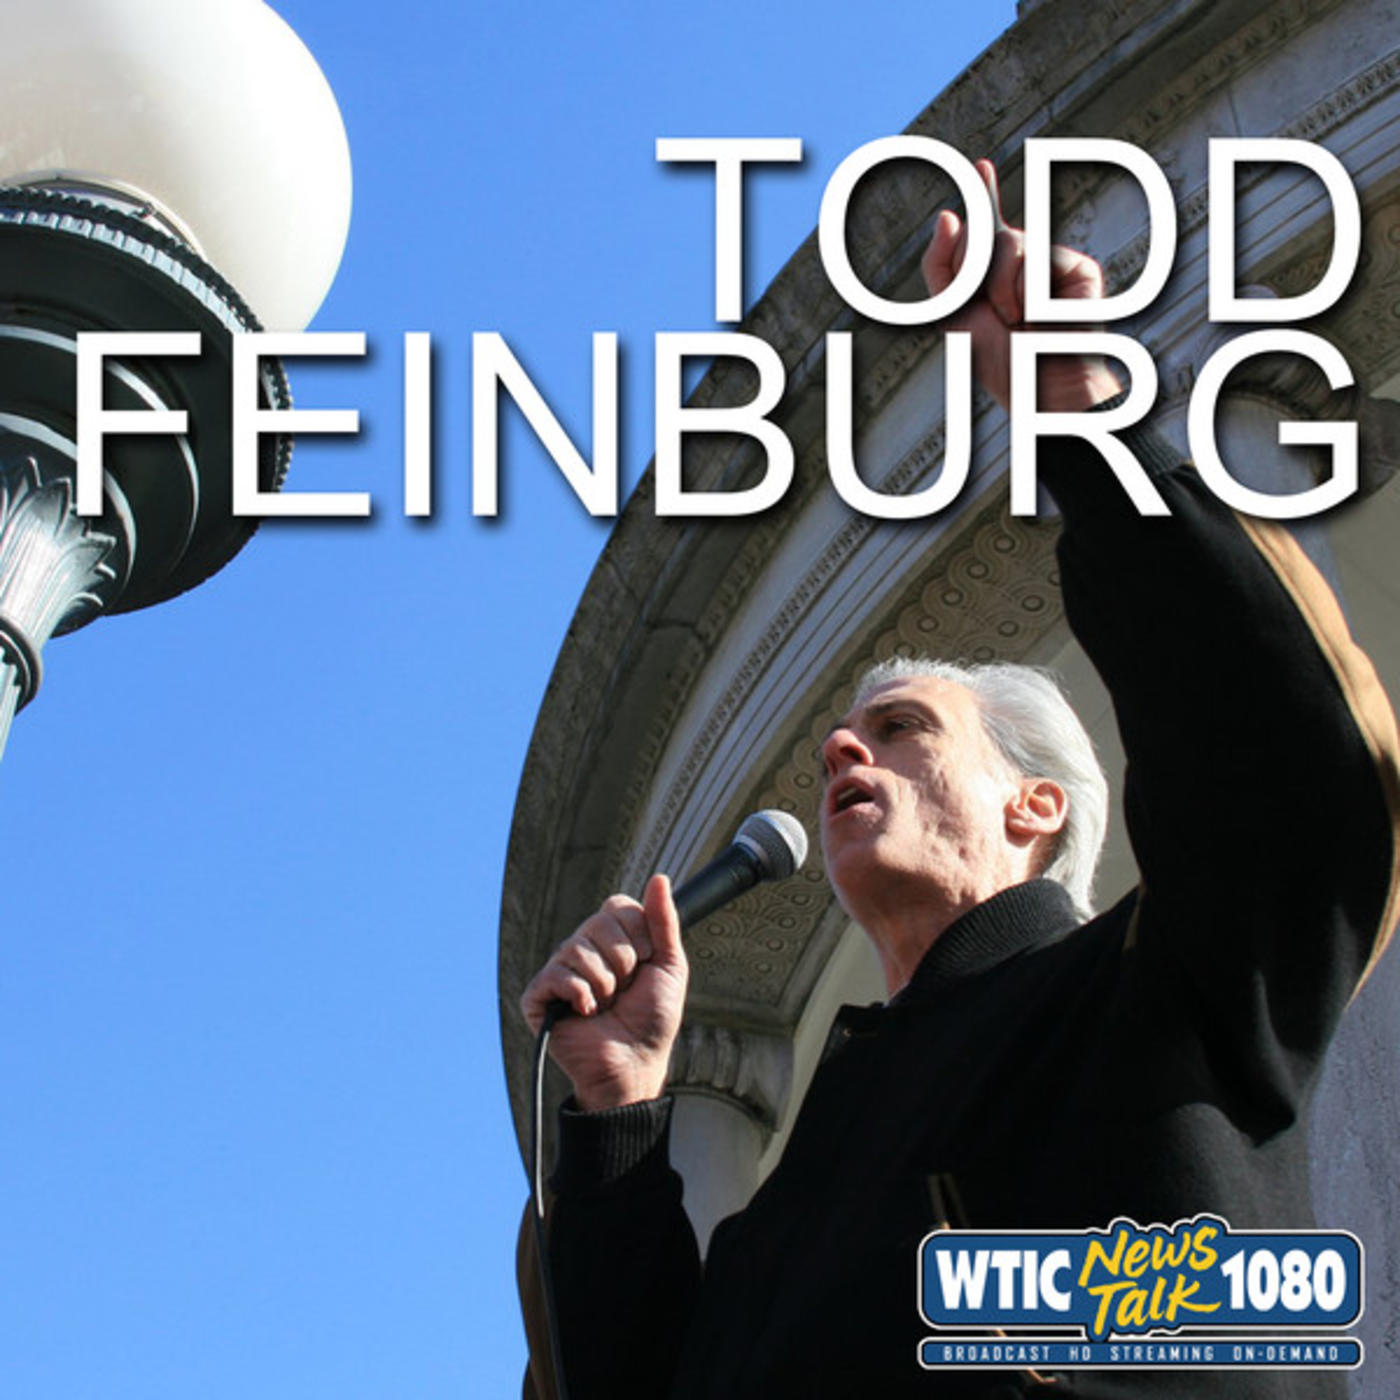 Todd Feinburg: Prison Life in the Age of COVID with Michael Liebowitz (Part 42) (04/27/20)